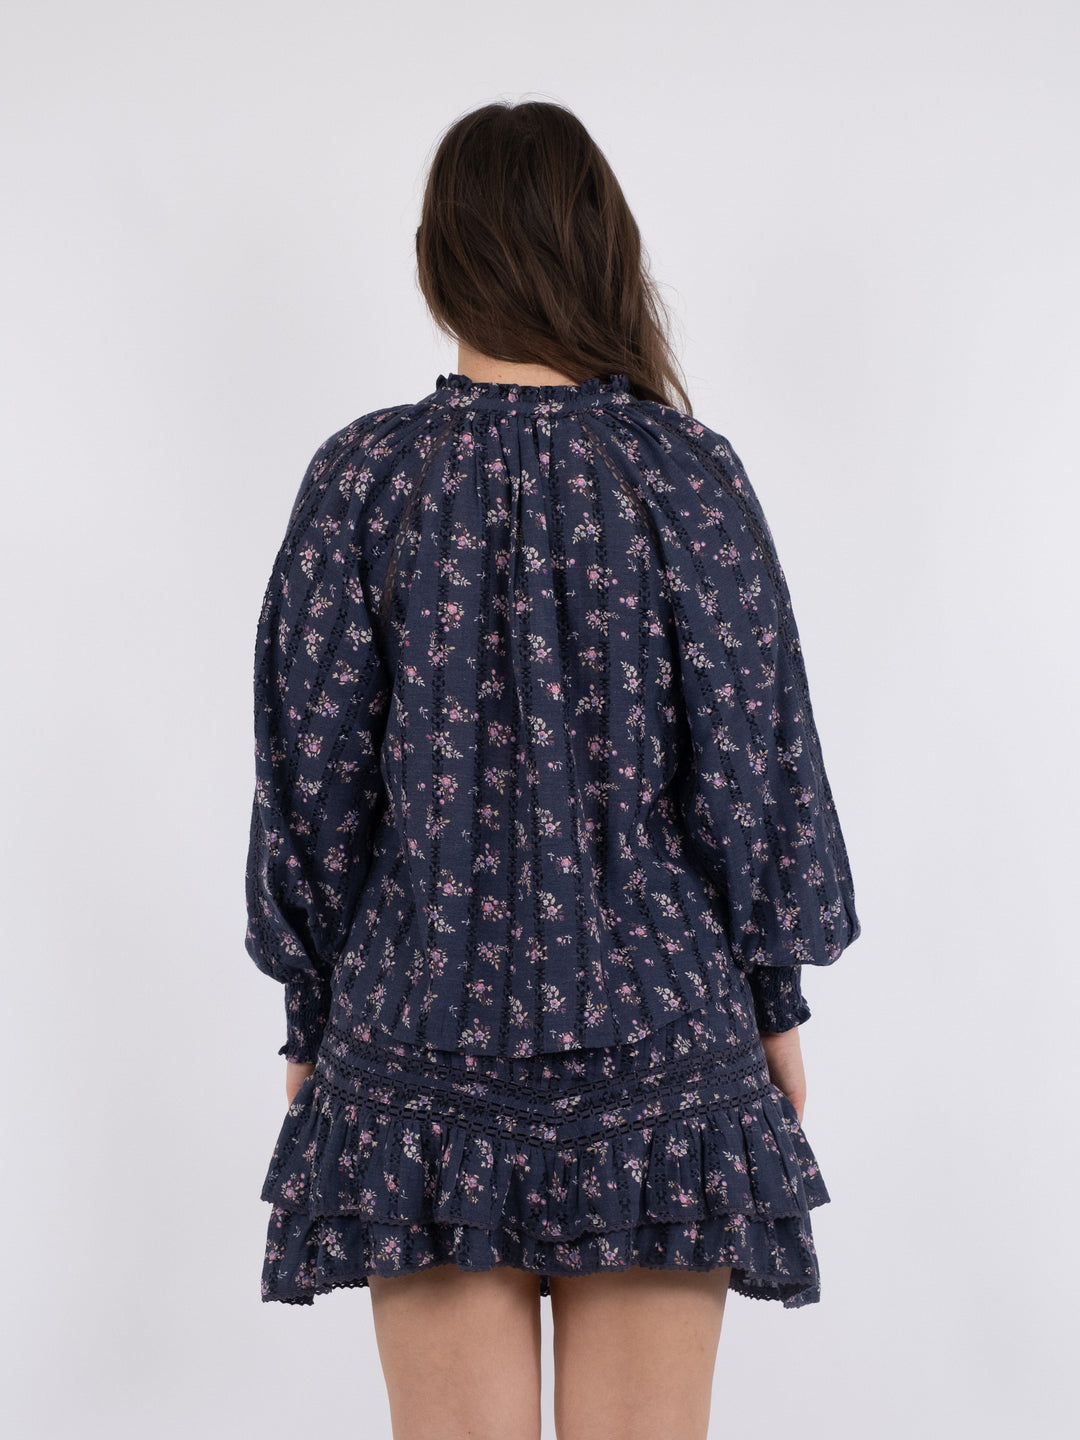 Neo Noir - Stimma Delicate Floral Blouse - Dusty Navy